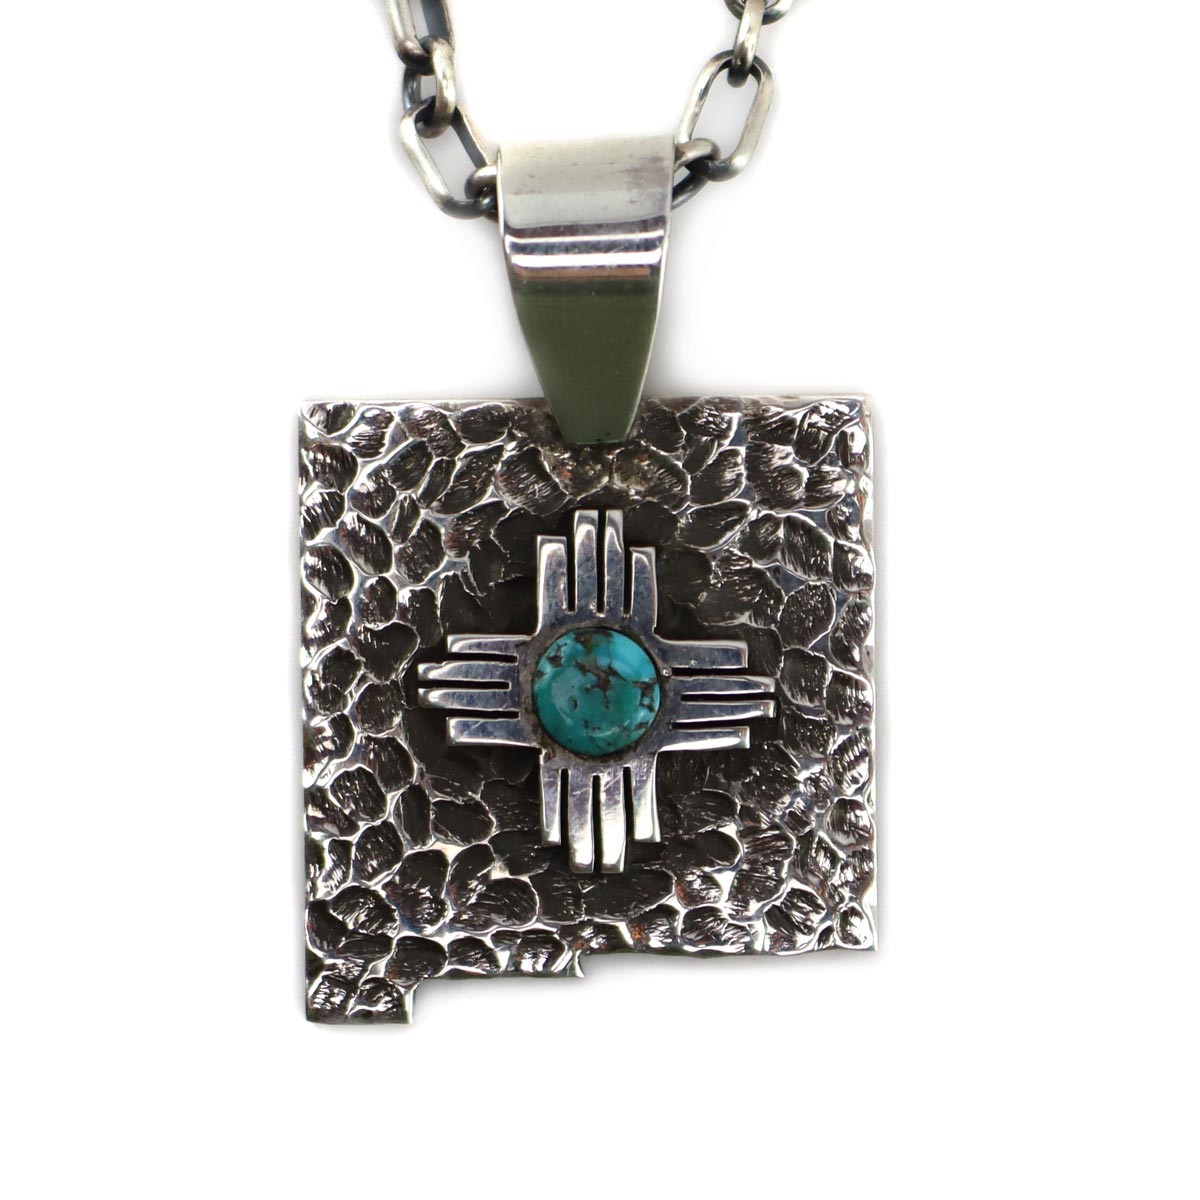 Alvin Yellowhorse (b. 1968) - Navajo Contemporary Turquoise and Dimpled Silver New Mexico Pendant with Handmade Chain, 25" length